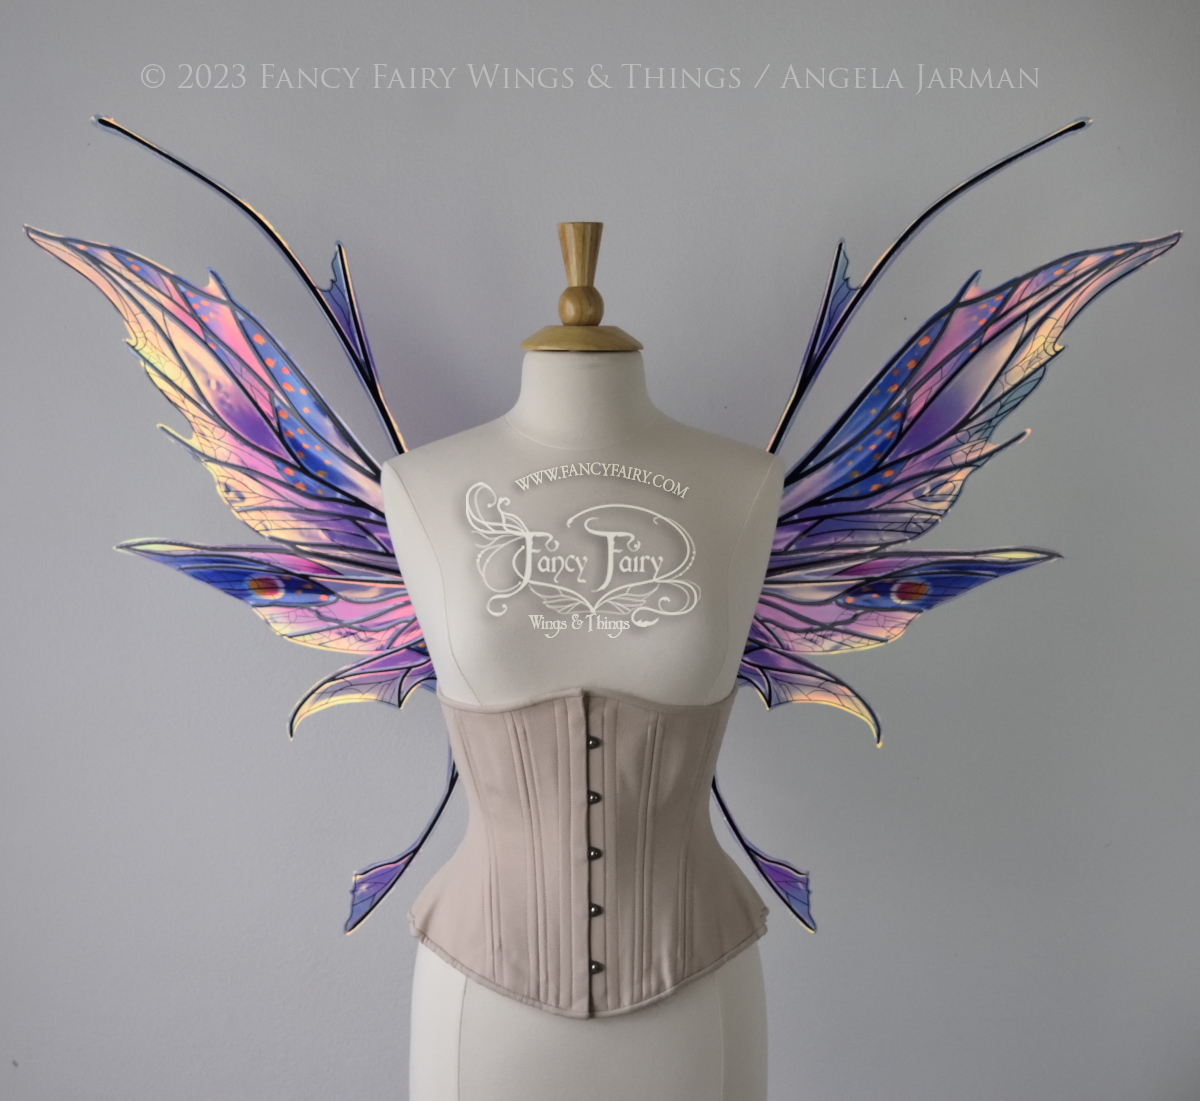 Front view of a dress form wearing an underbust corset & large blue / lavender / red painted iridescent fairy wings with antennae, black veins, spikey shapes